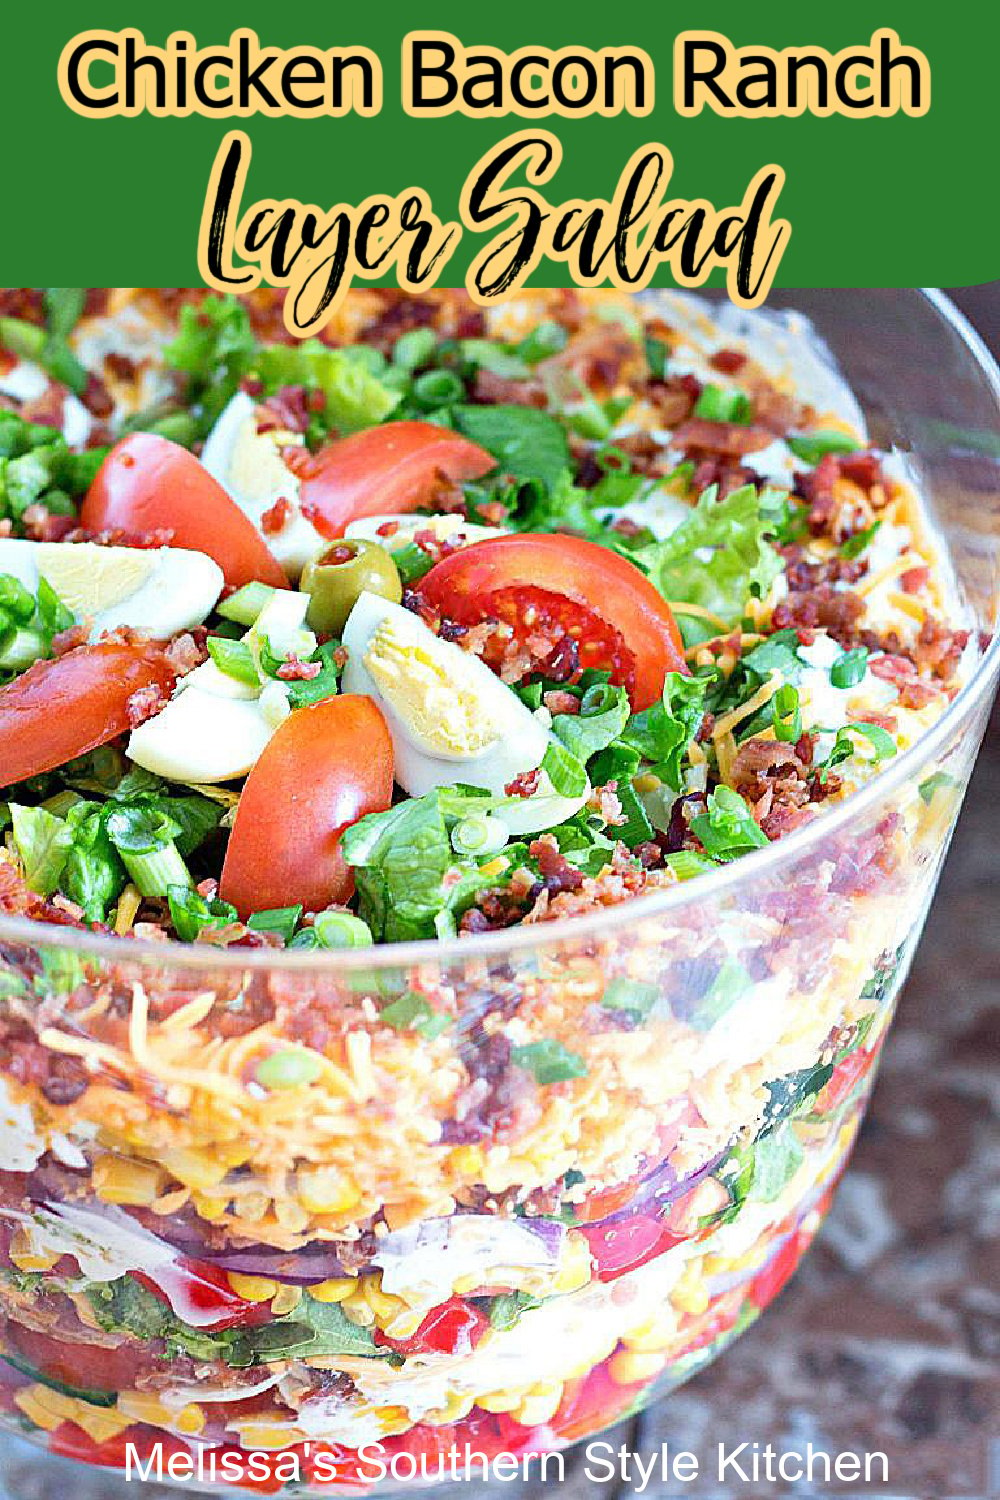 Enjoy this stunning Chicken Bacon Ranch Layer Salad as a side dish or an entree #chickenbaconranch #layersalad #chickenbaconranchsalad #chicken #bacon #salads #saladrecipes #sideidishrecipes #dinnerideas #dinner #southernfood #ranchdressing #southernrecipes